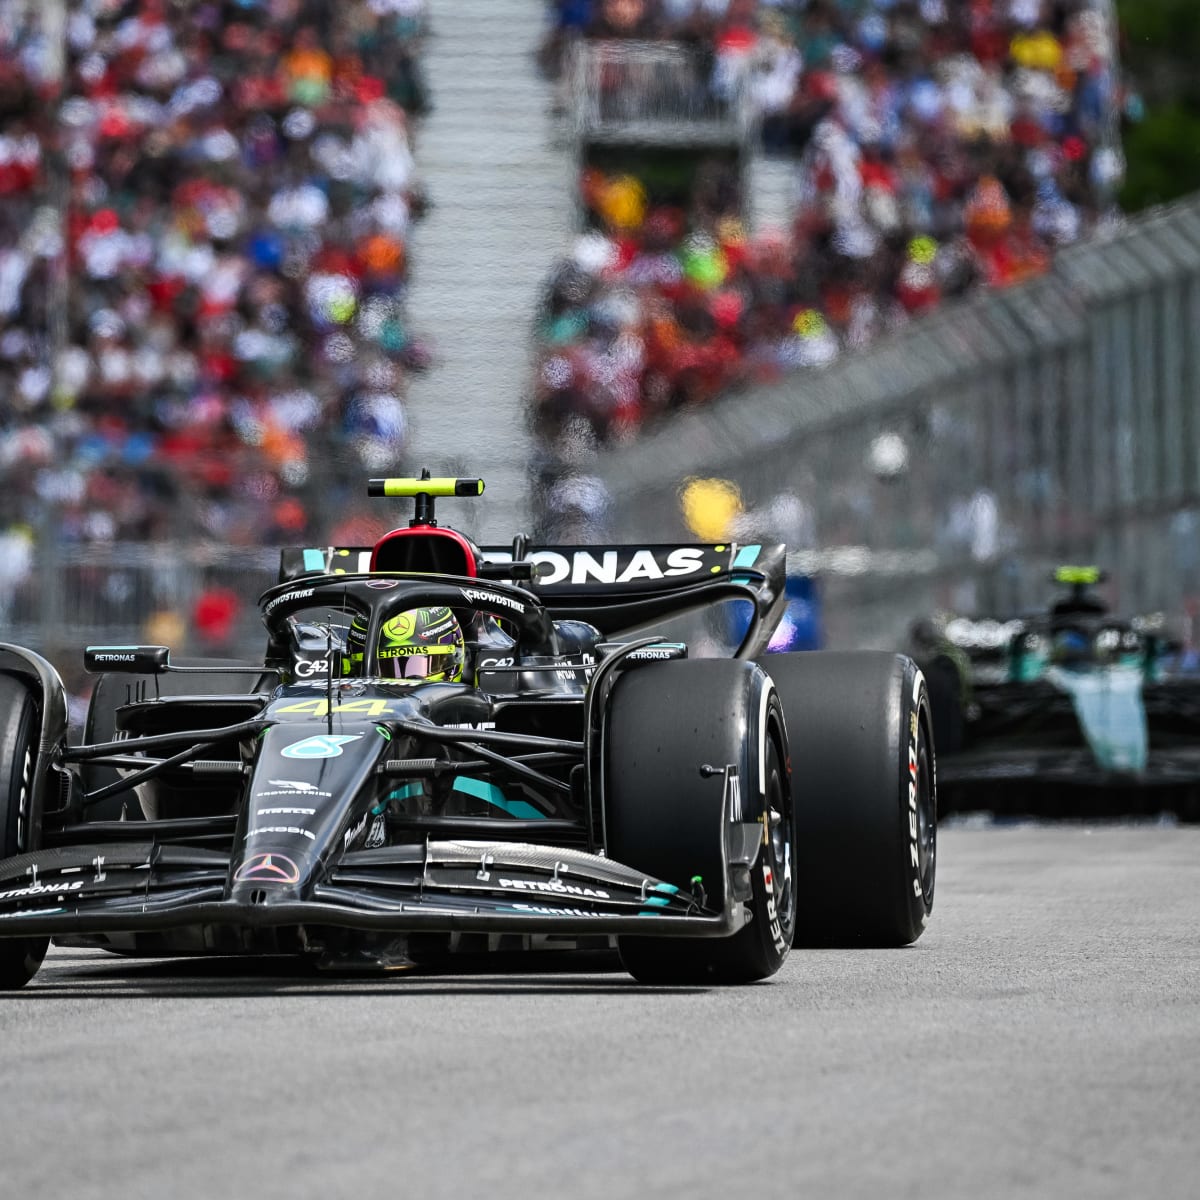 Hungarian Grand Prix Free Live Stream Formula 1 Online - How to Watch and Stream Major League and College Sports